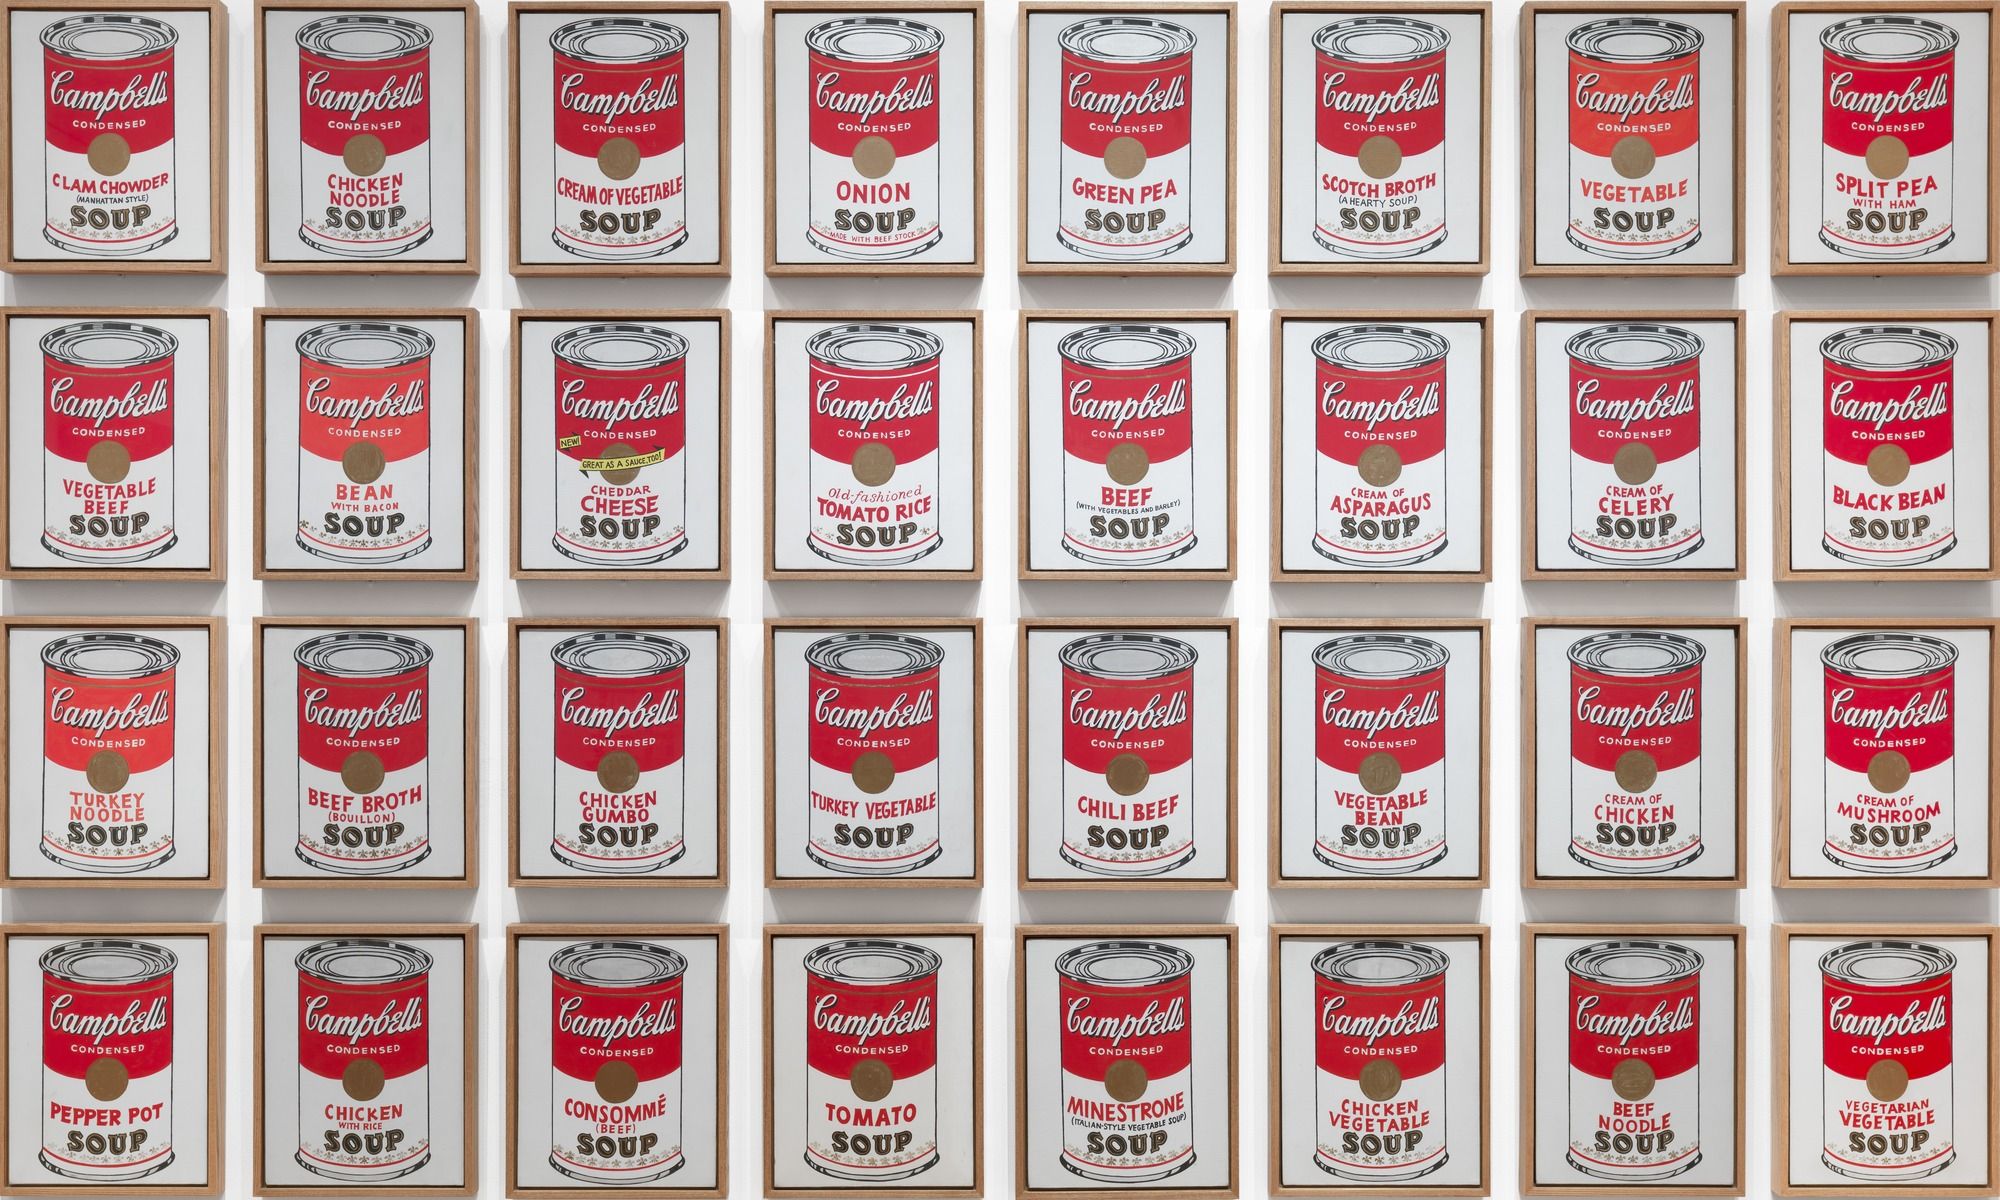 Andy Warhol's Campbell's Soup Cans